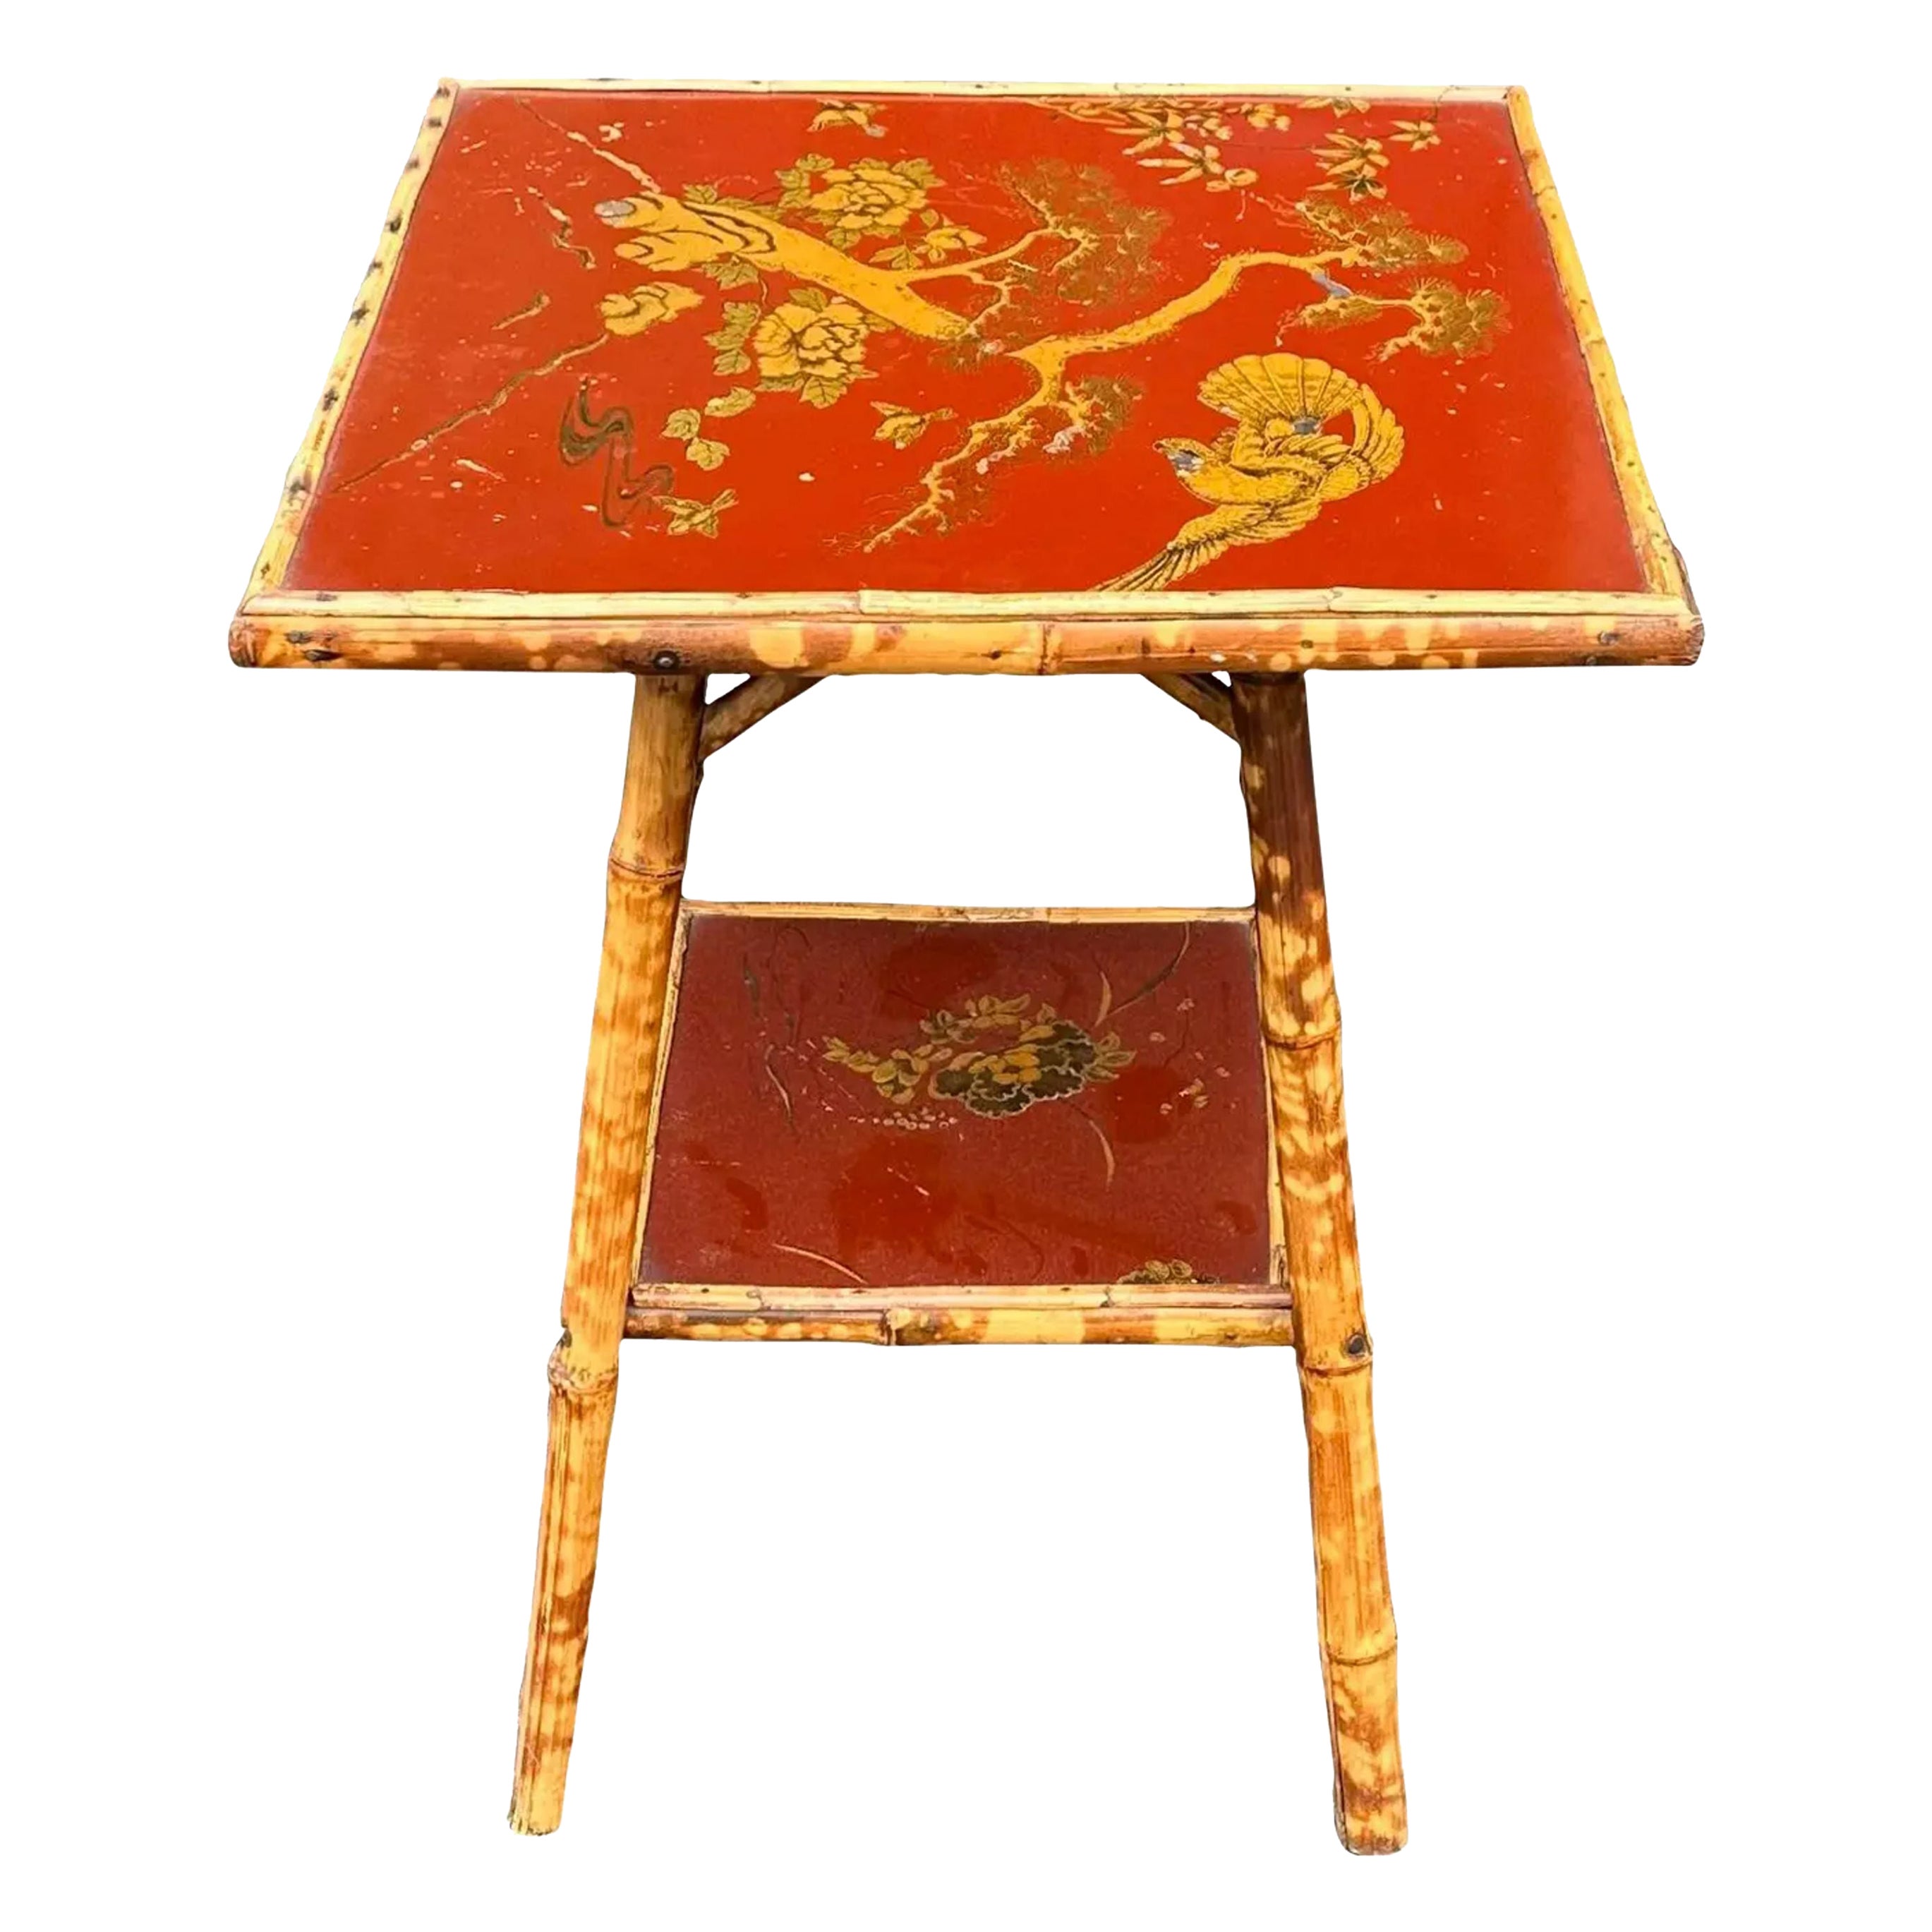 Antique Regency Style Red Chinoiserie Bamboo Table, 19th Century